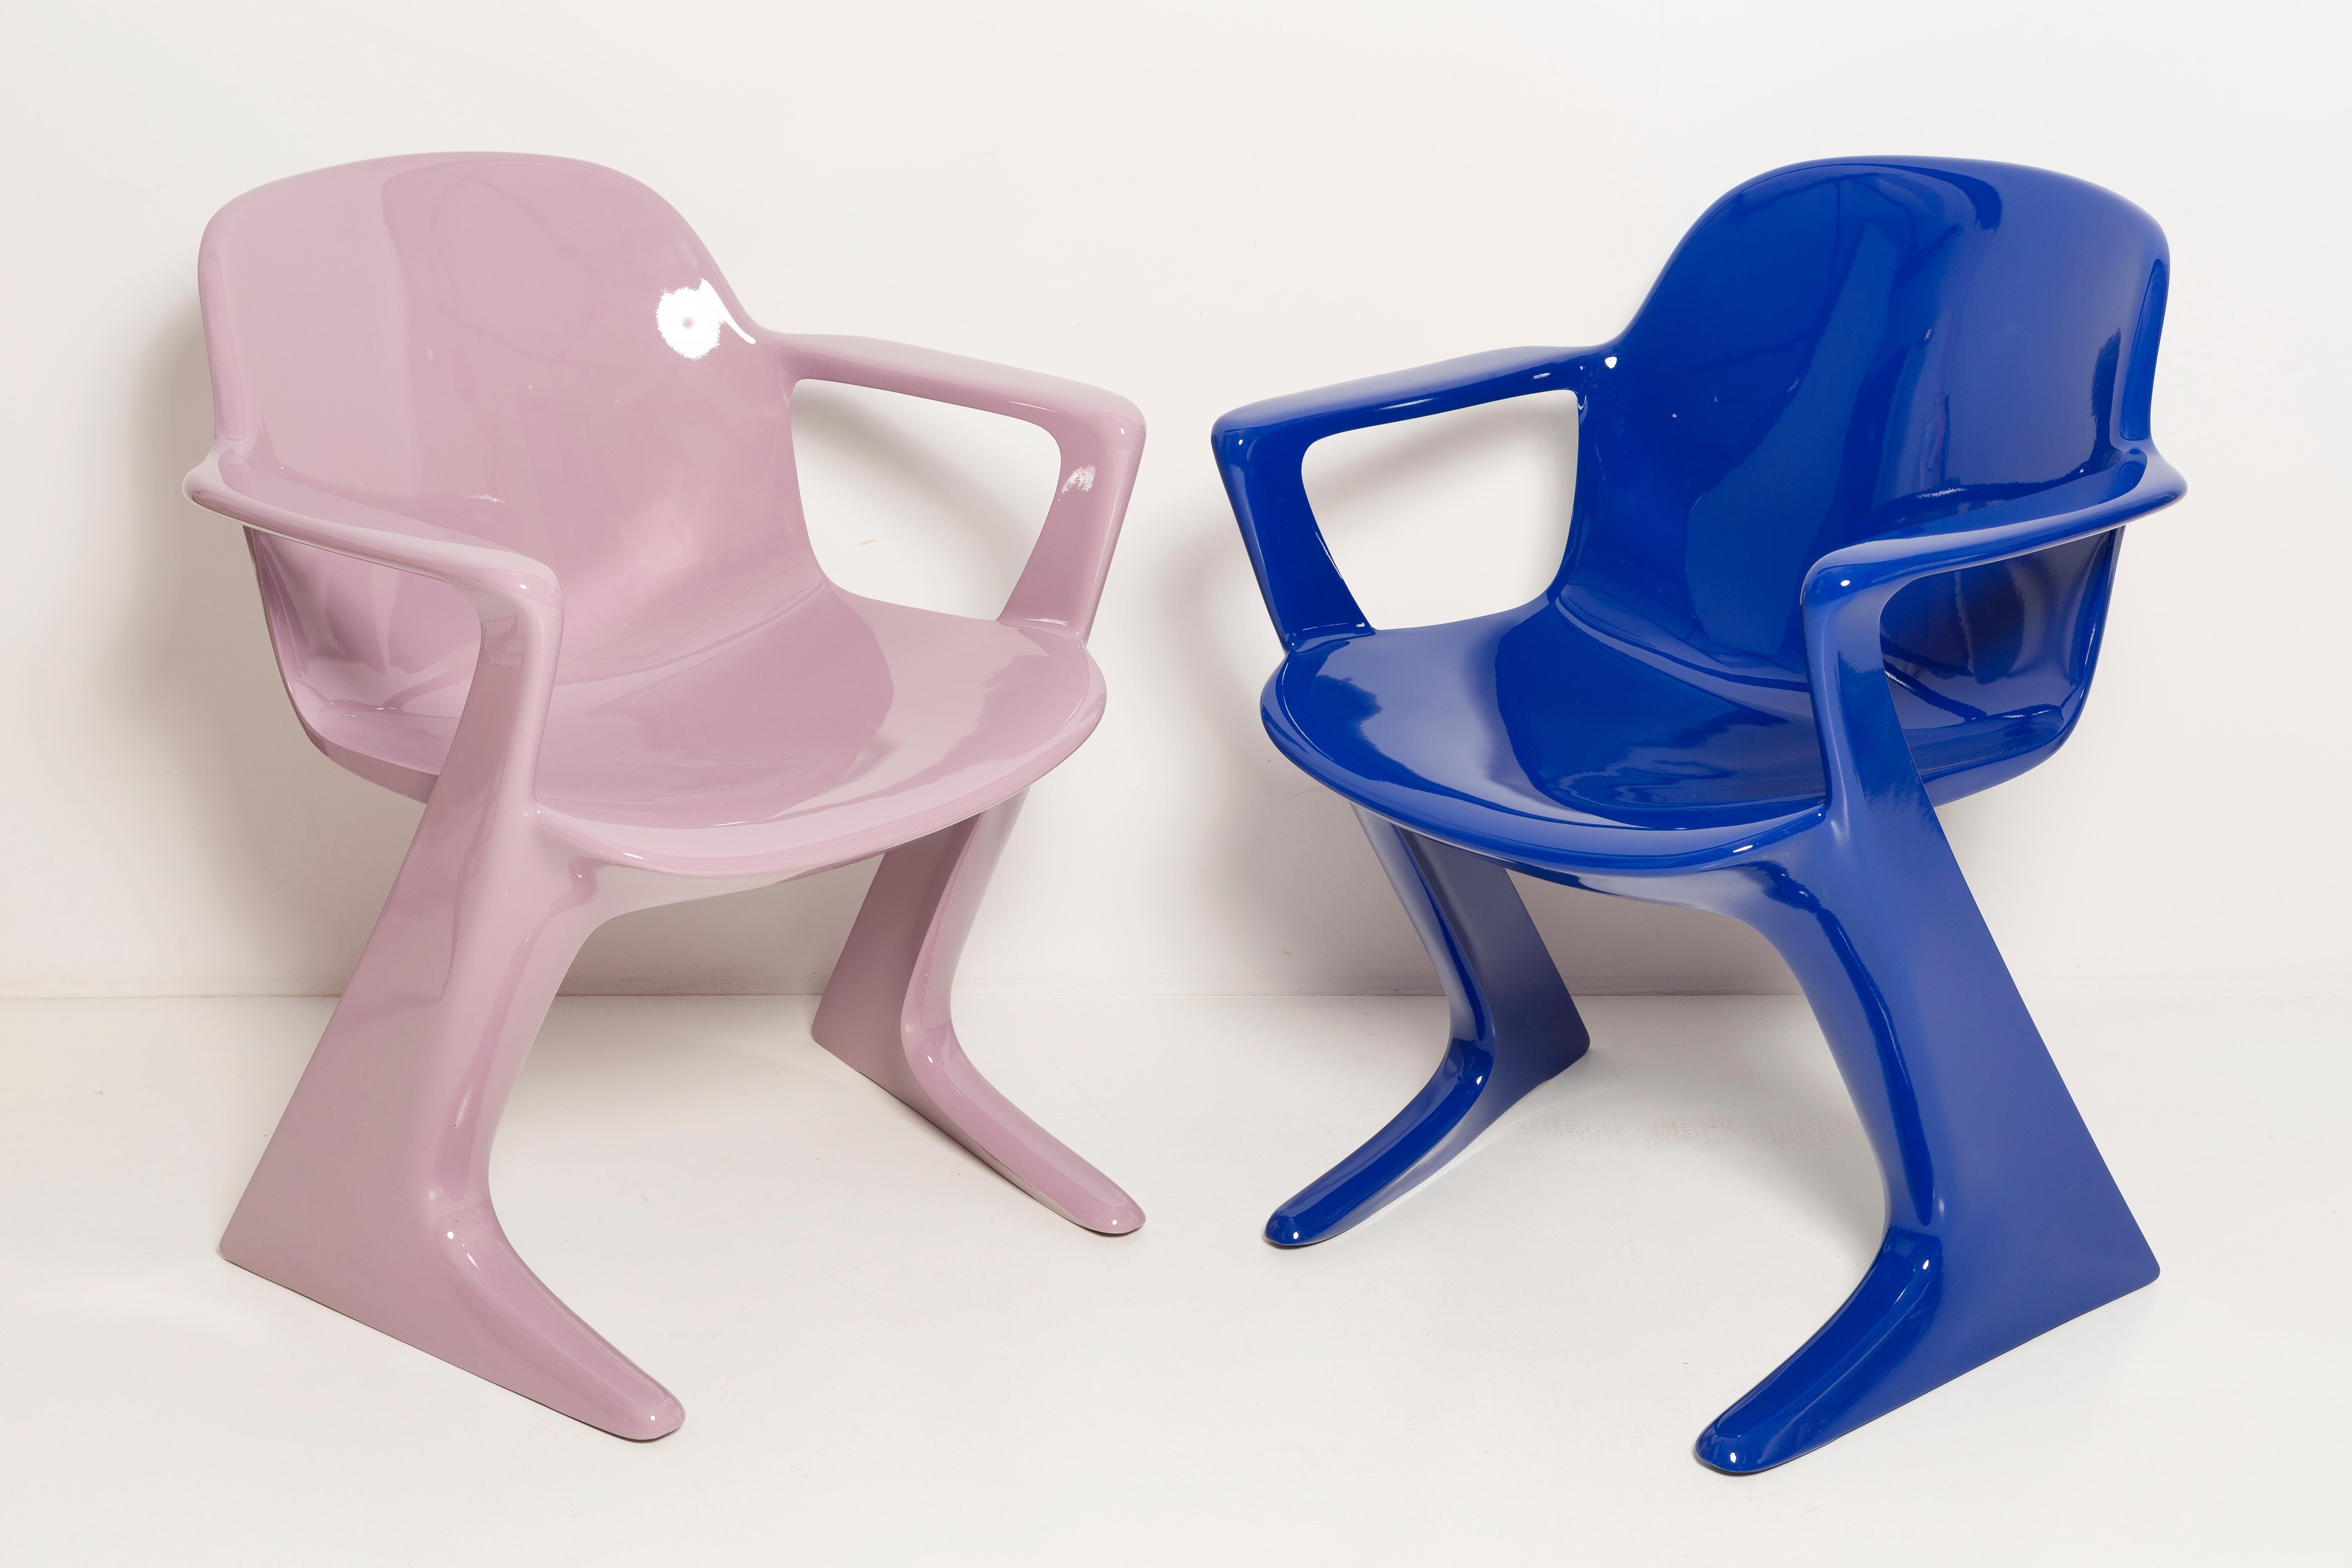 The z.stuhl chair, designed by Ernst Moeckl (1931-2013) in the 1970s, is a cantilever chair made of polyurethane, which is available with and without armrests. In the vernacular, the chair is known by its geometry-related names such as 